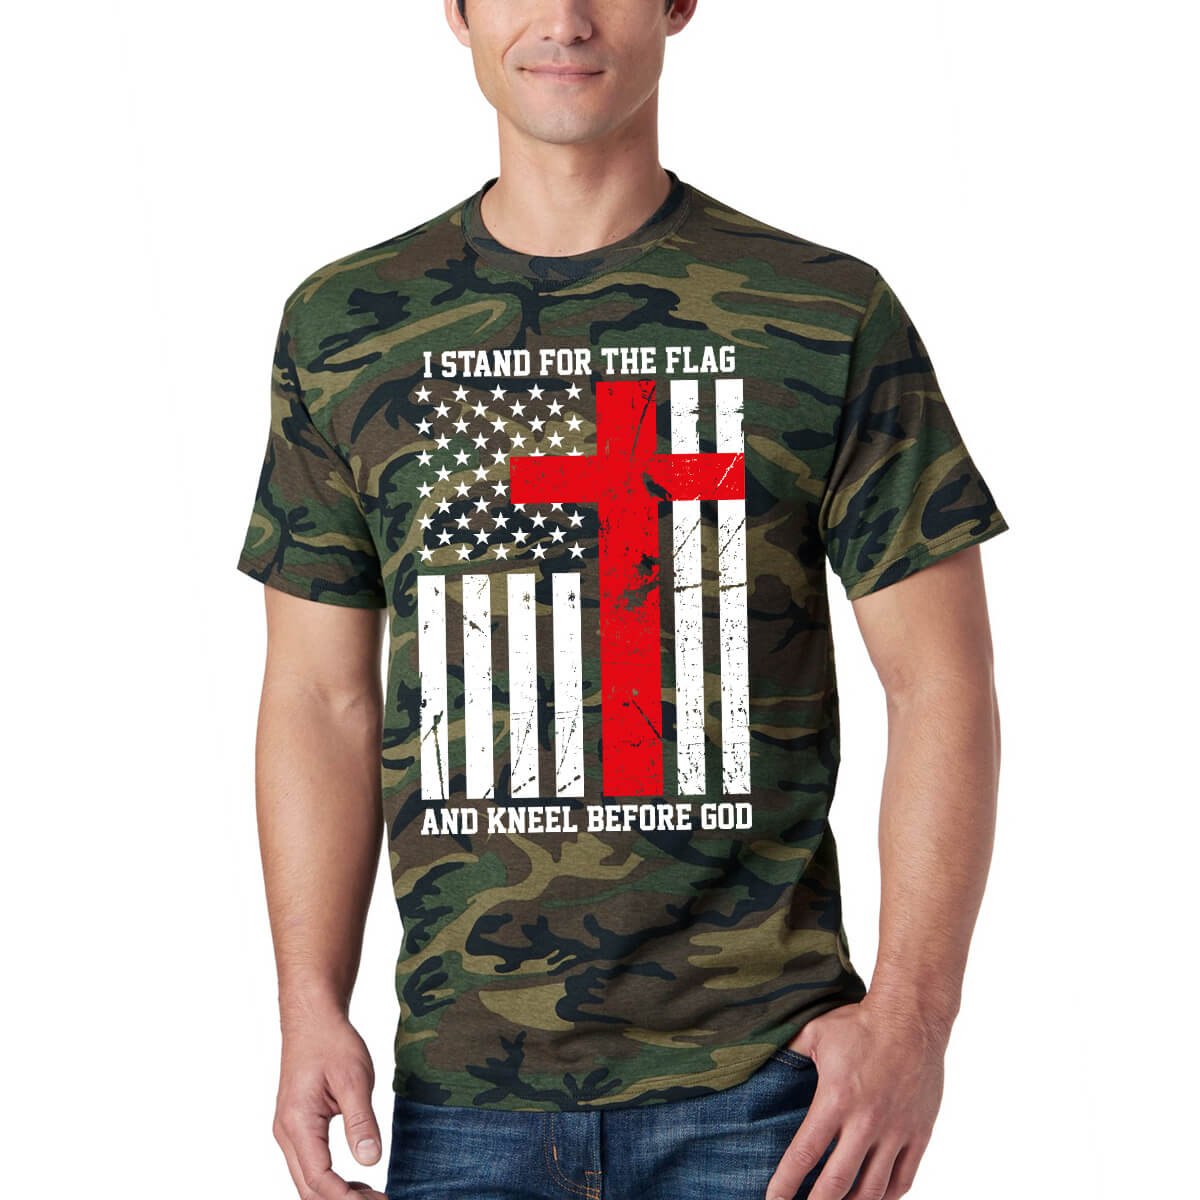 I Stand For The Flag And Kneel Before God Men's Camo T-Shirt